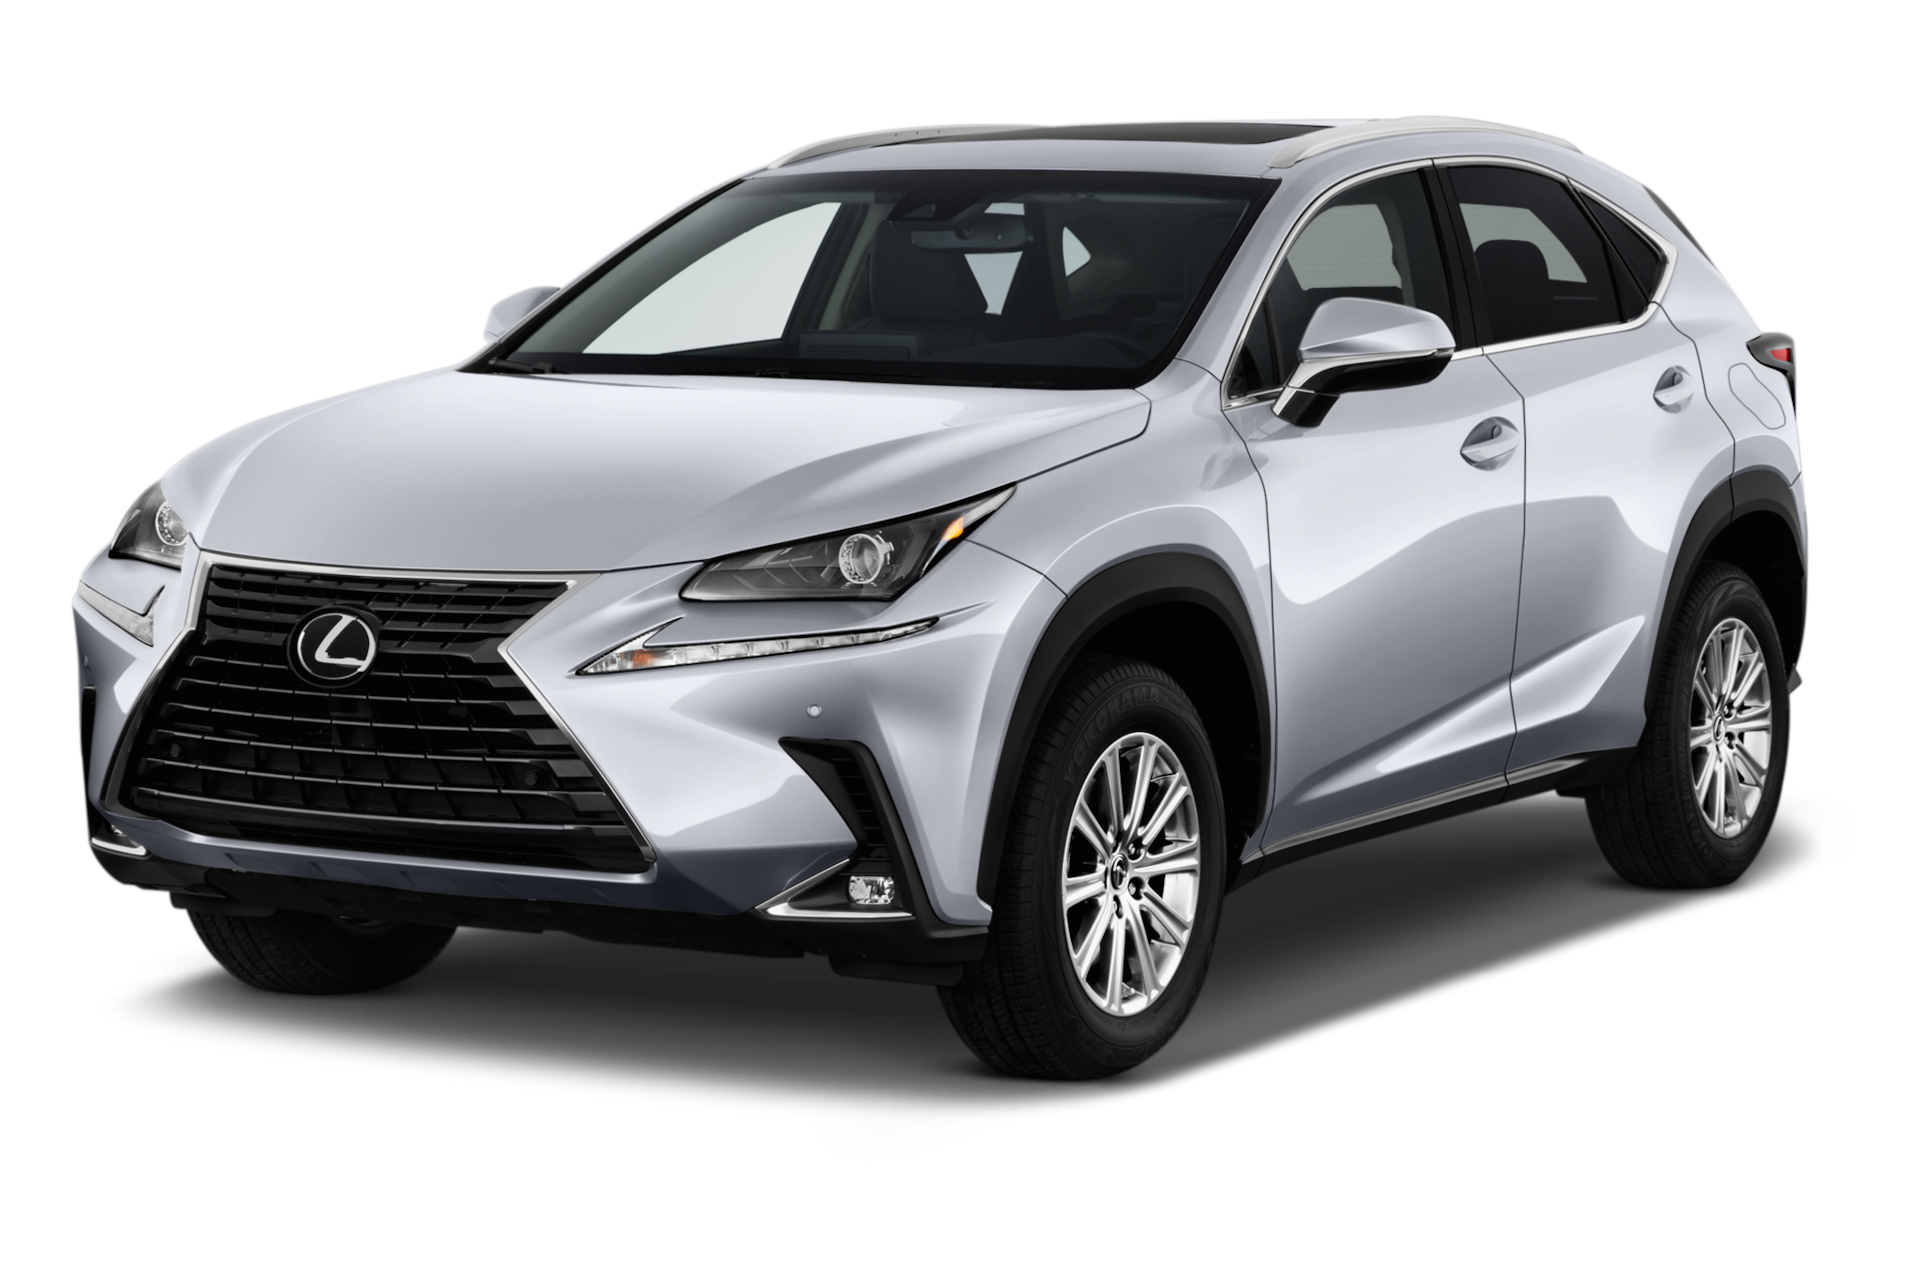 2018 Lexus NX Prices, Reviews, and Photos - MotorTrend